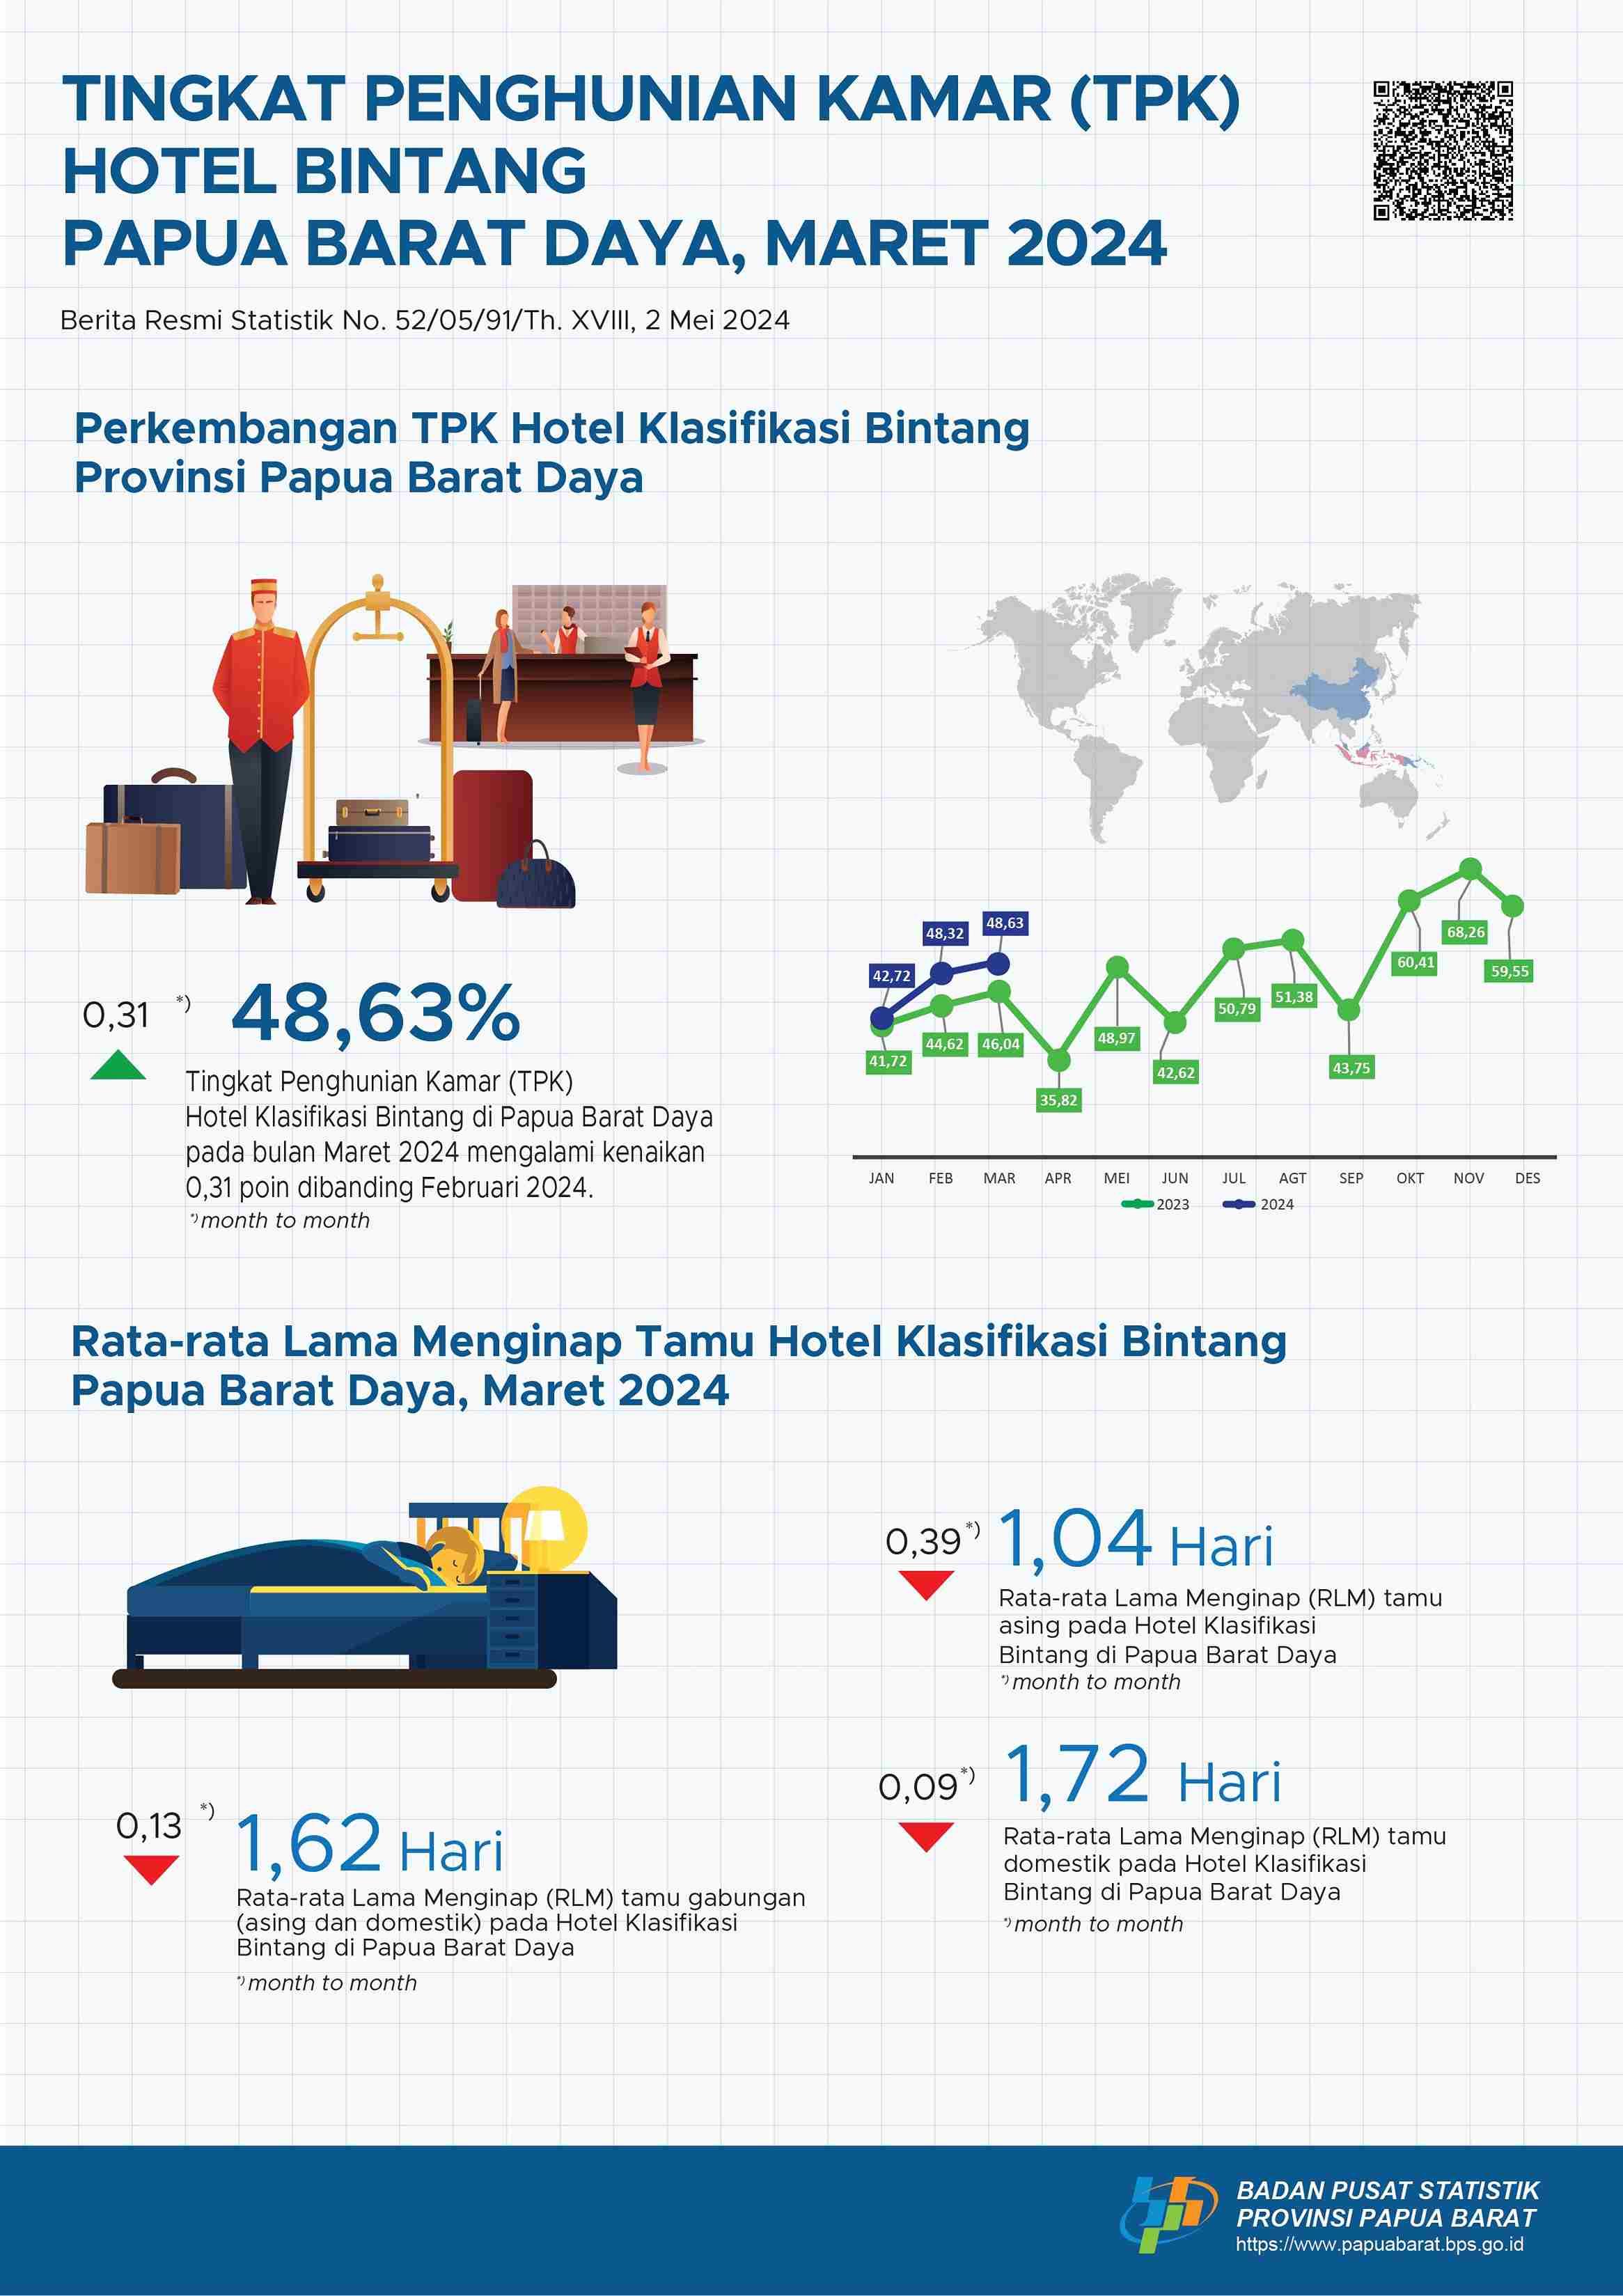 The Room Occupancy Rate (RoR) of Papua Barat classified hotels in March 2024 was 48,63 percent